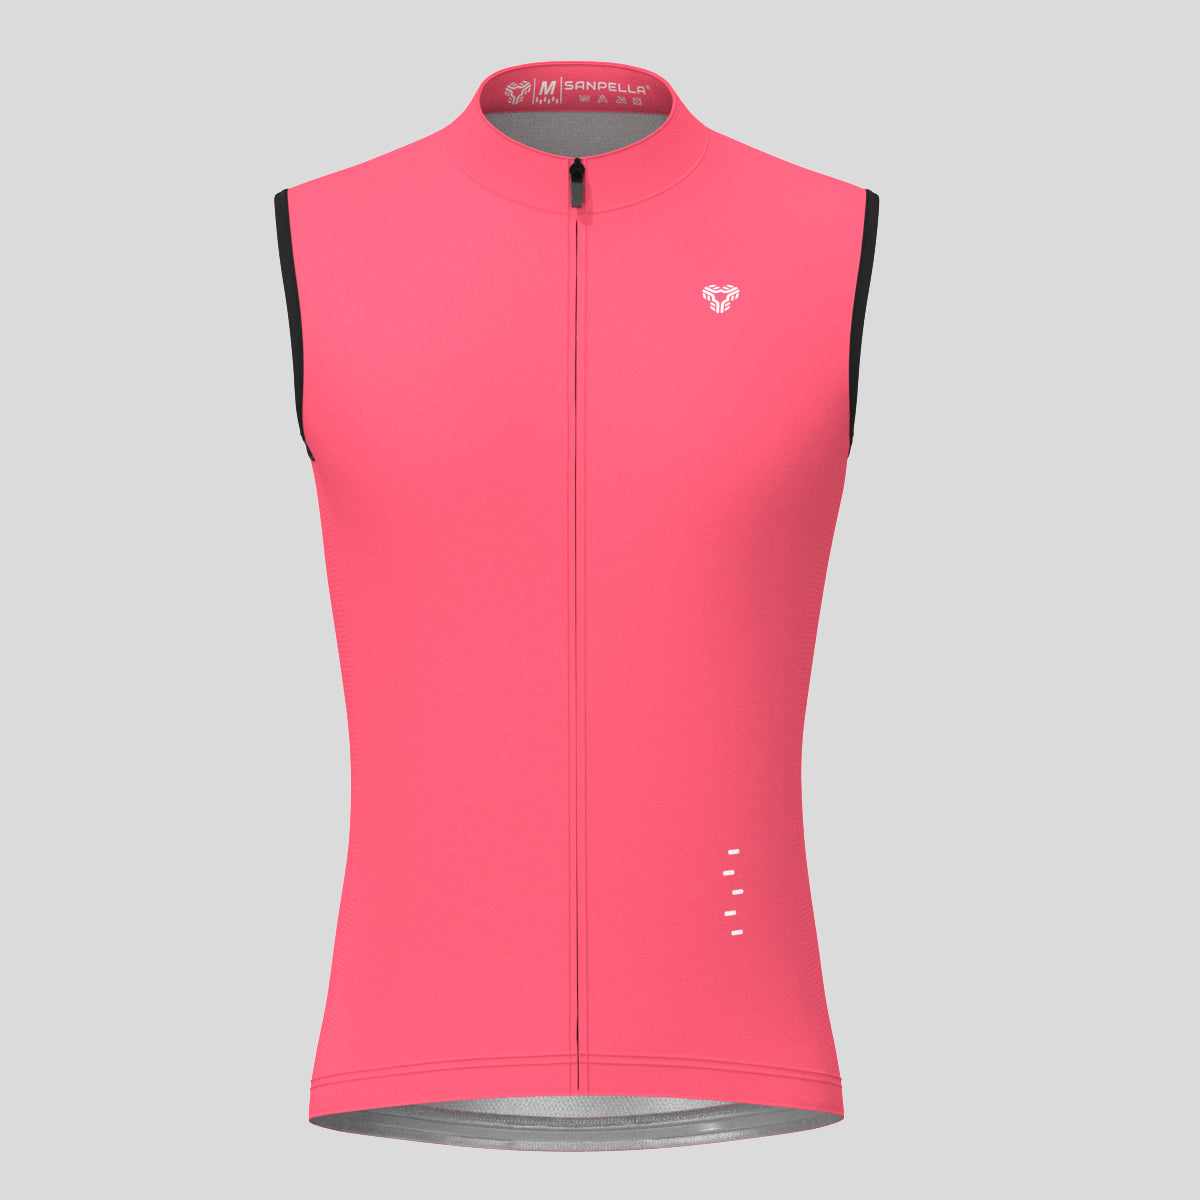 Men's Minimal Solid Sleeveless Cycling Jersey - Pink